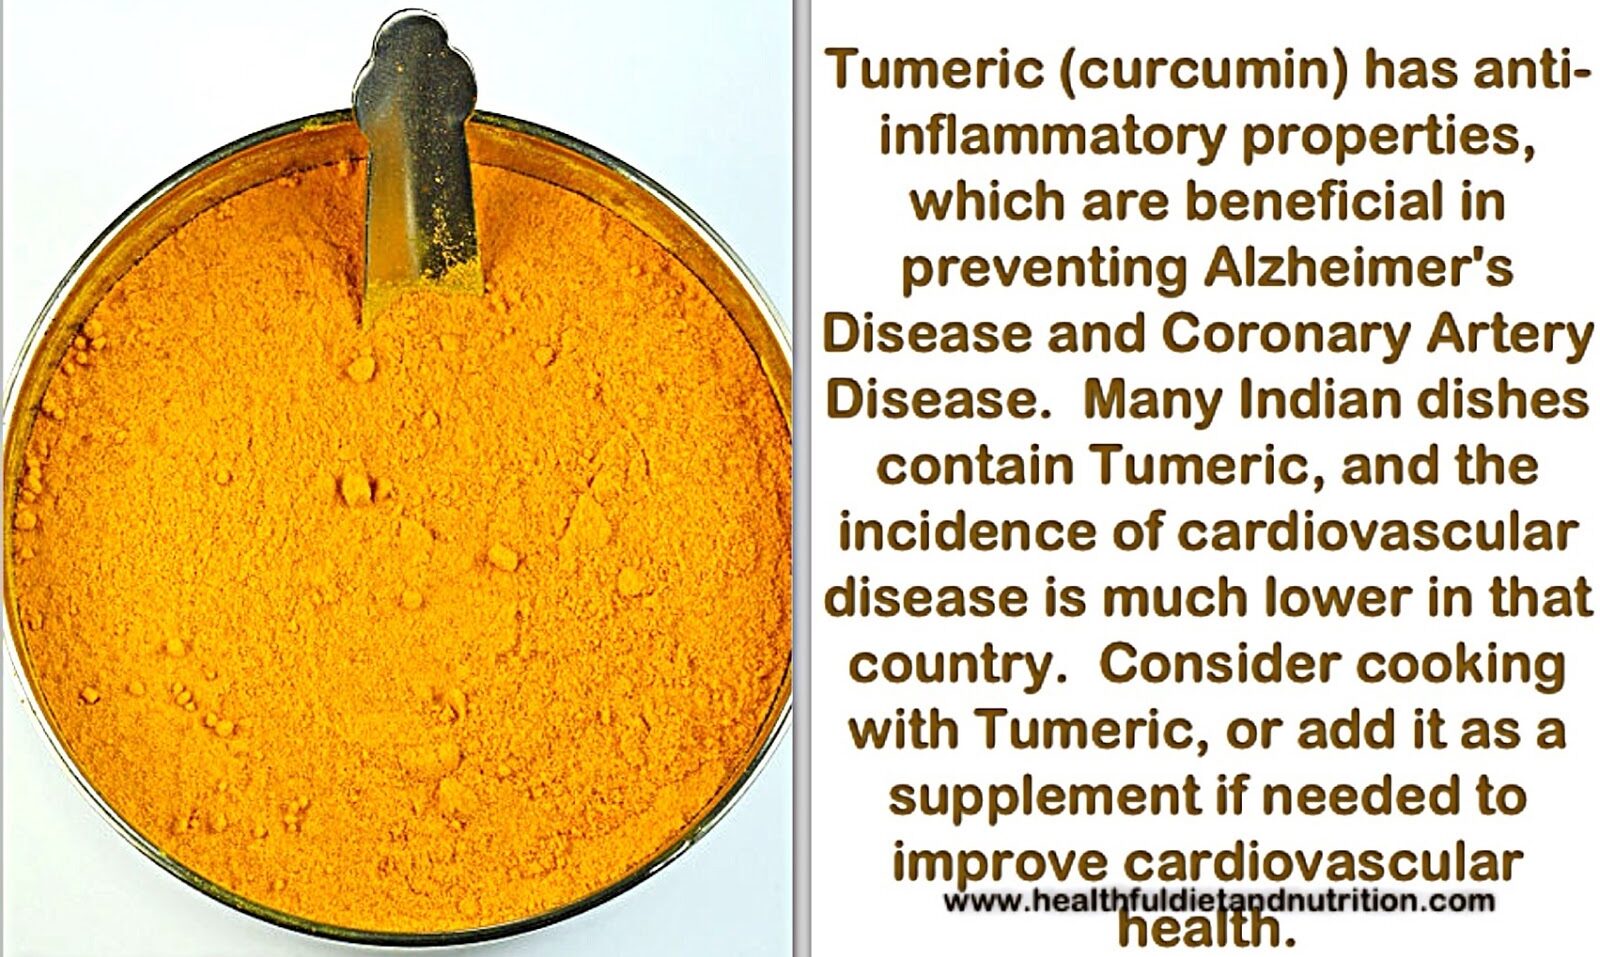 Cook With Turmeric